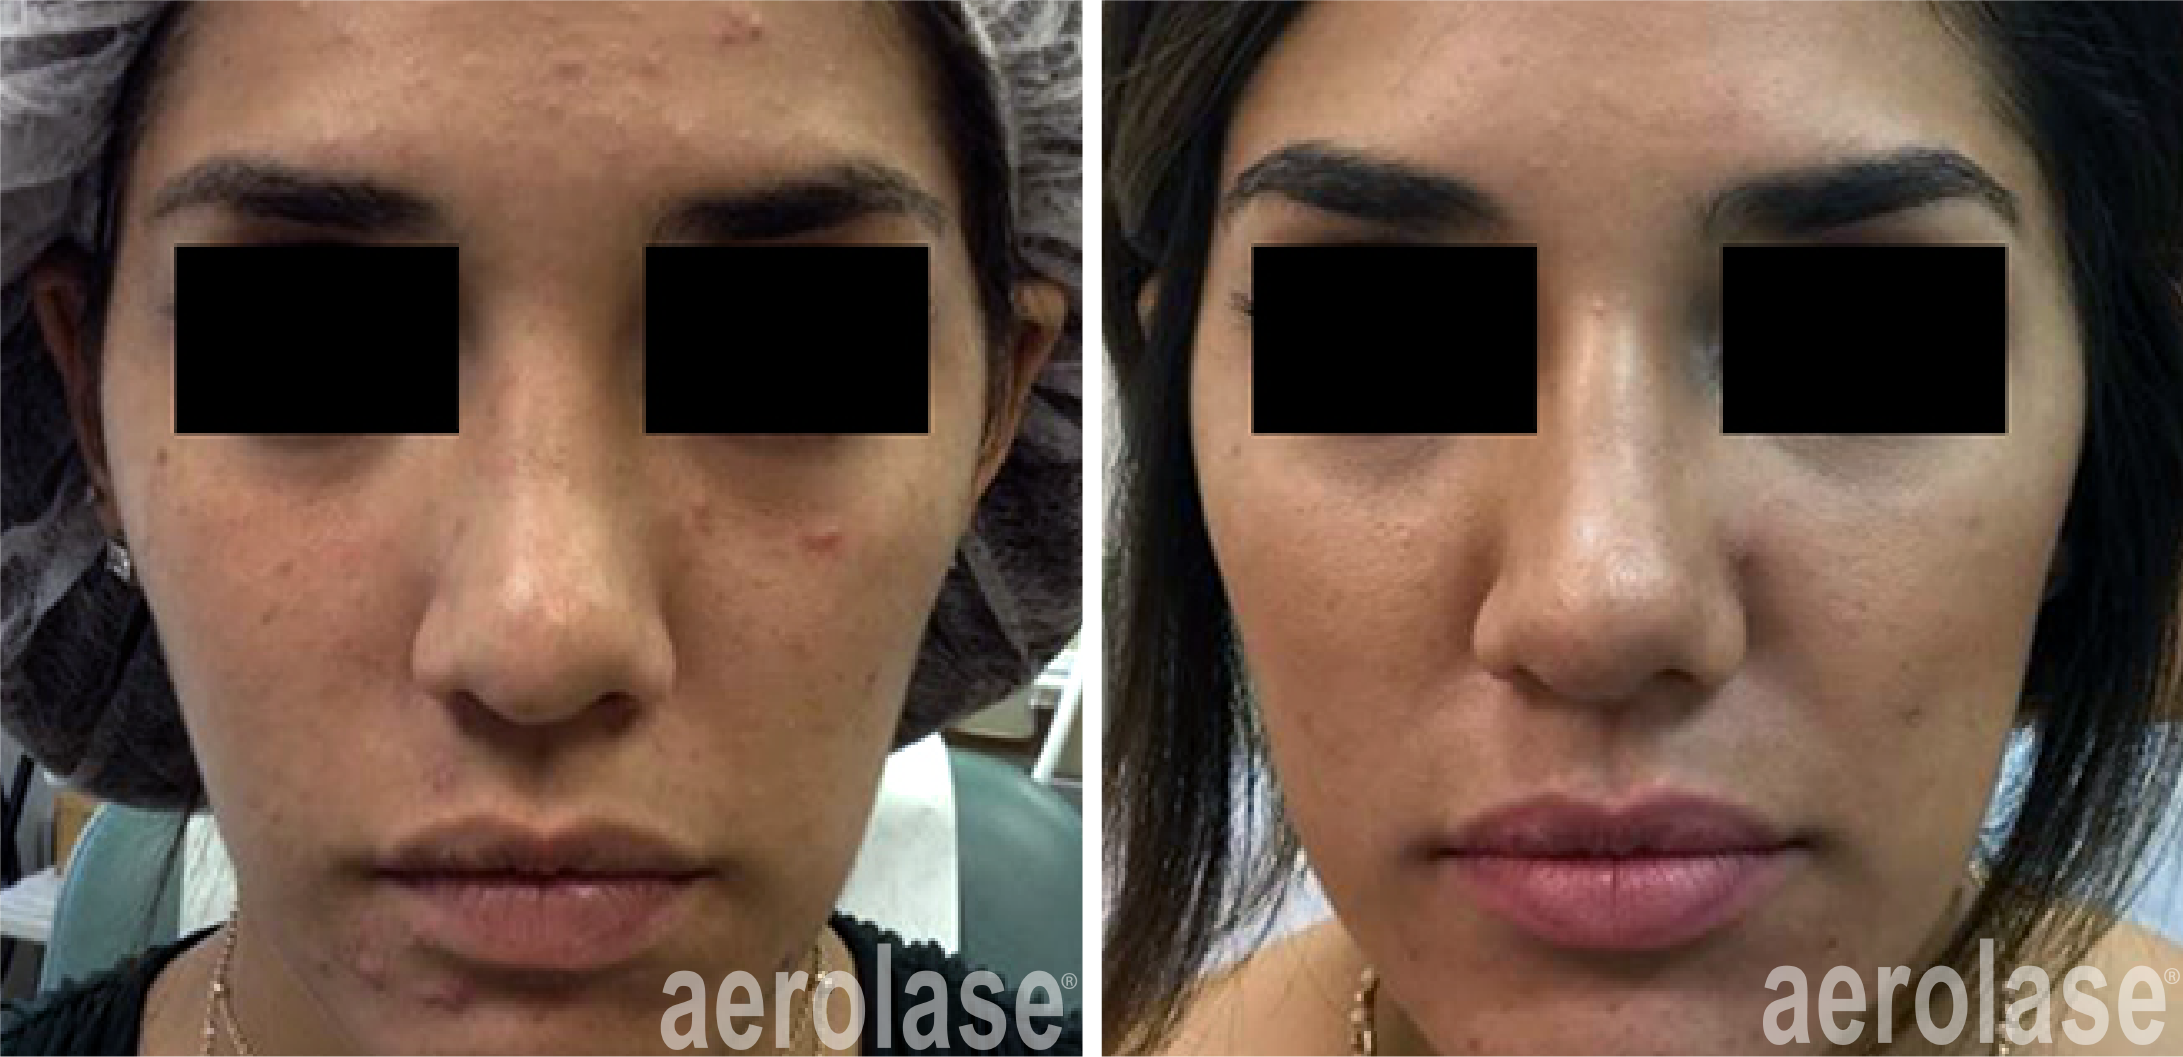 aerolase-mark-nestor-acne-2-months-after-4-treatments.png